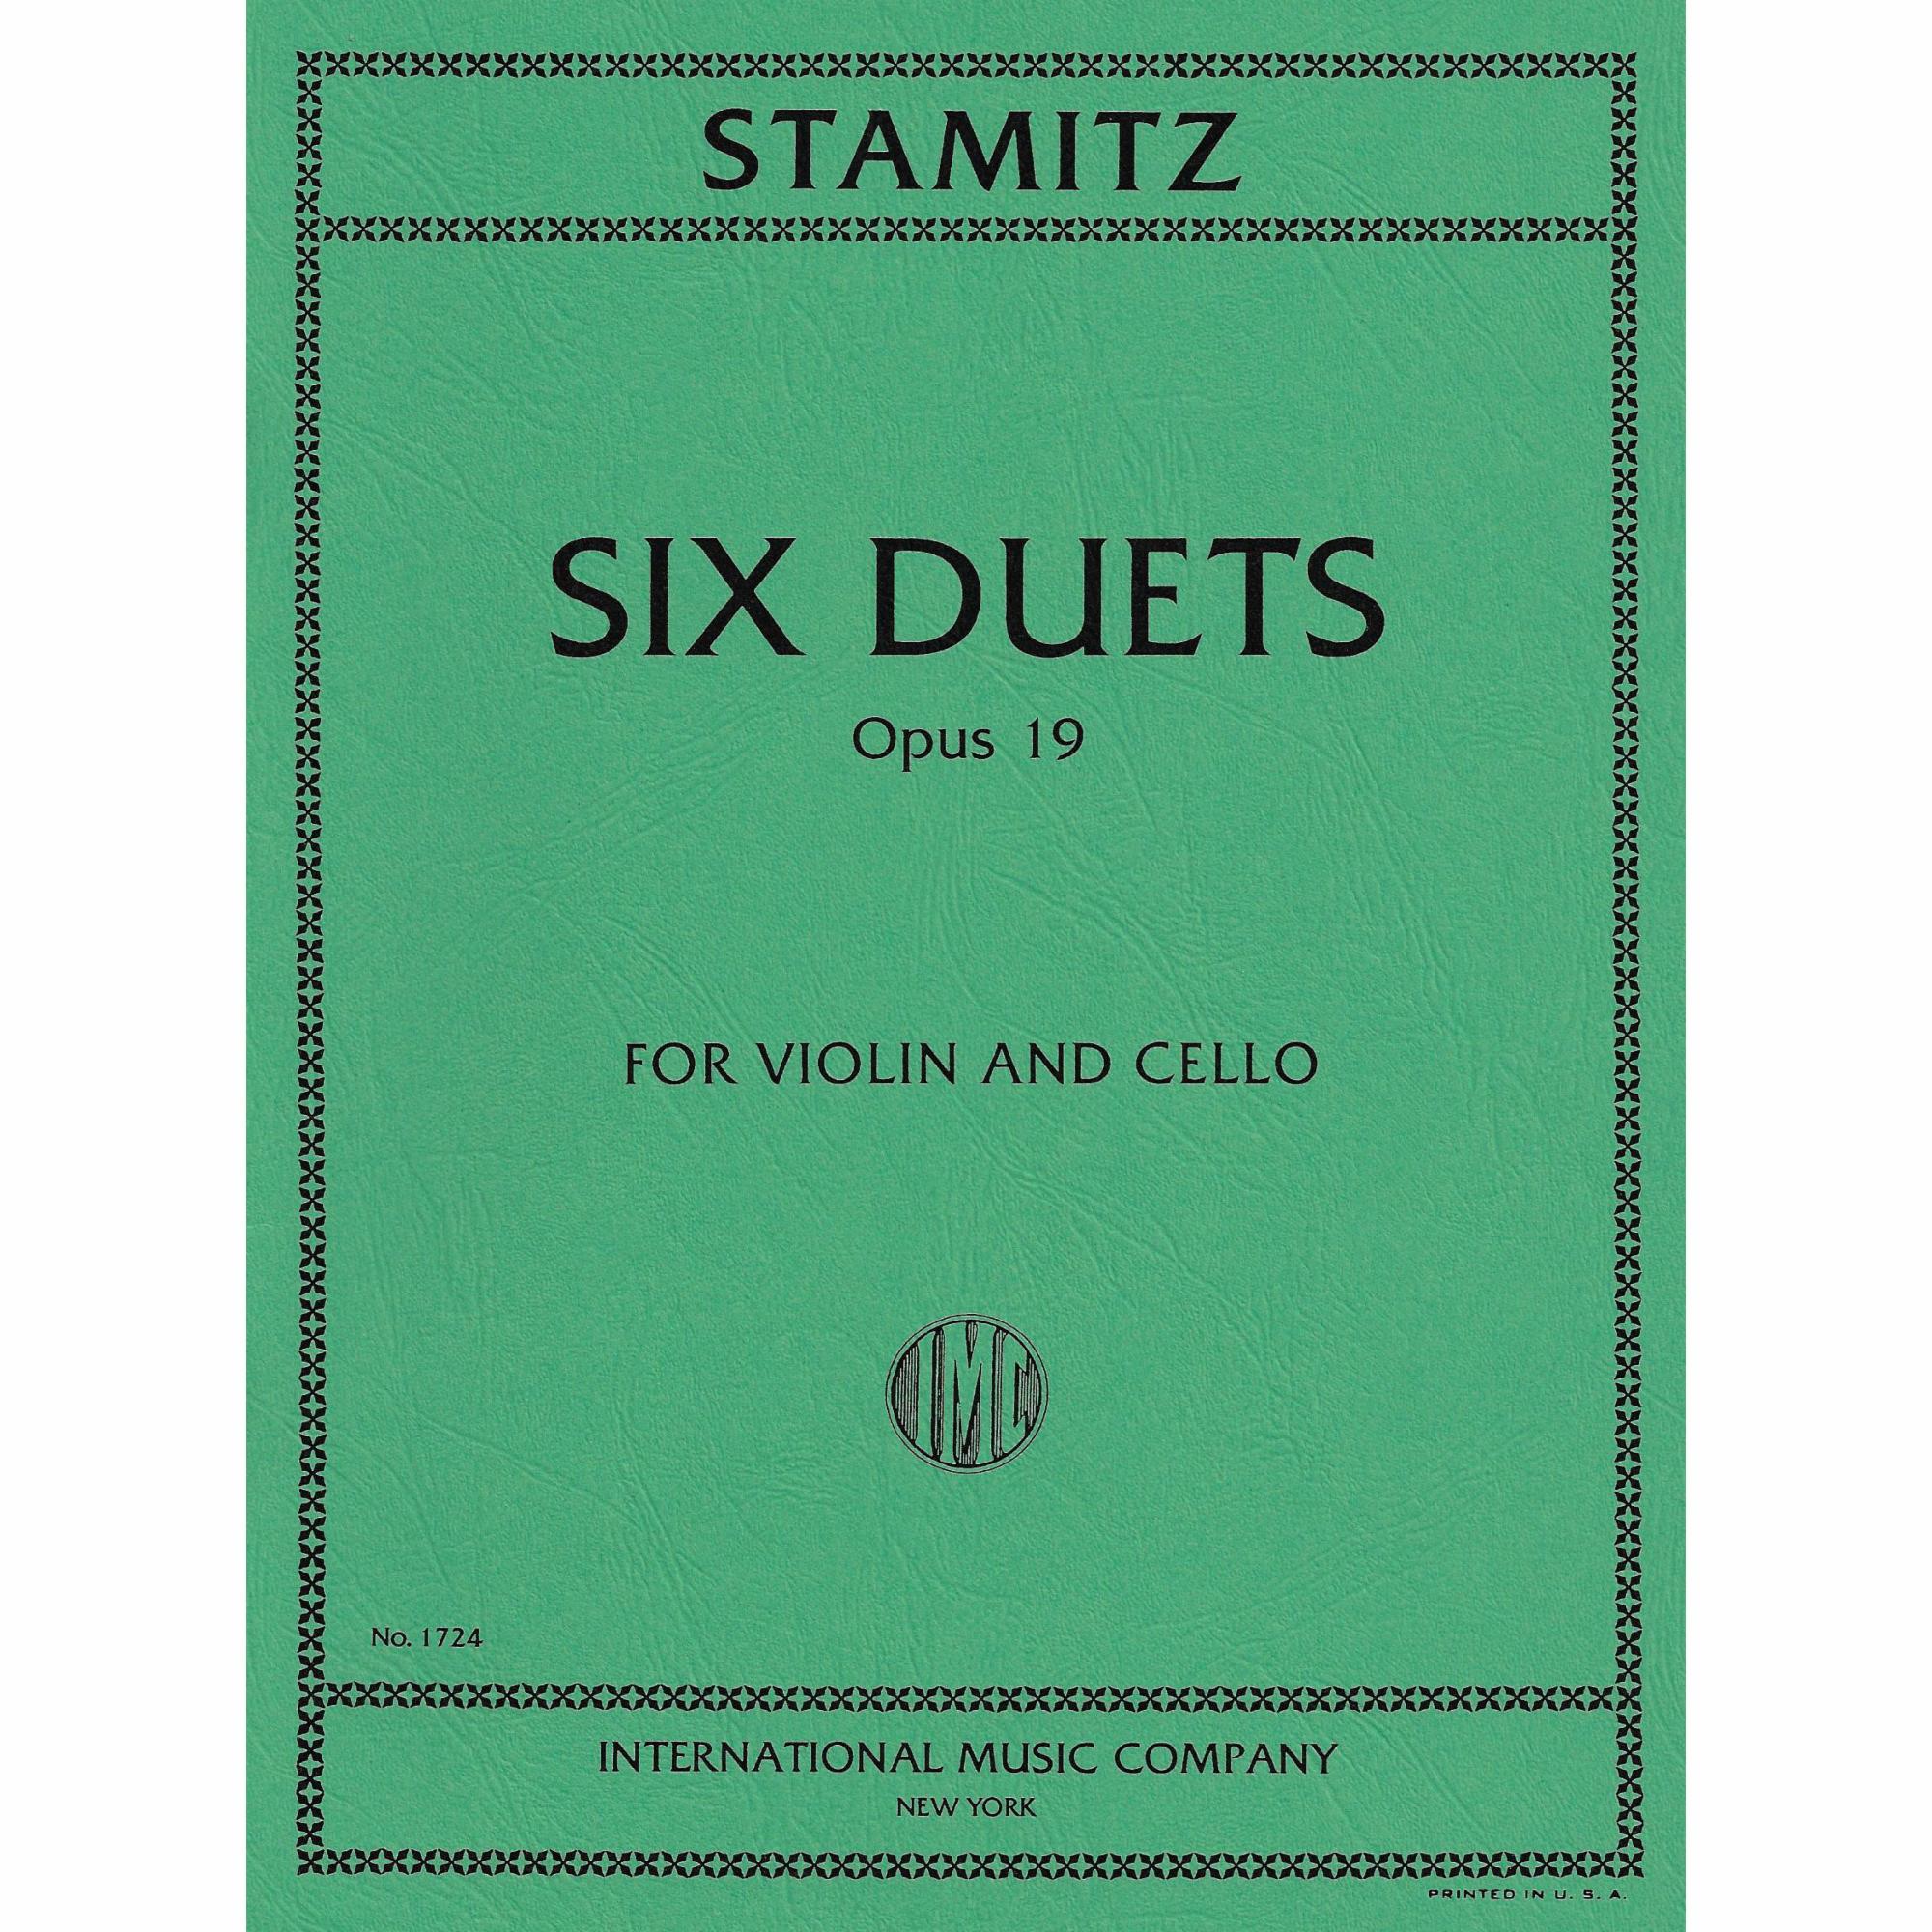 Stamitz -- Six Duets, Op. 19 for Violin and Cello